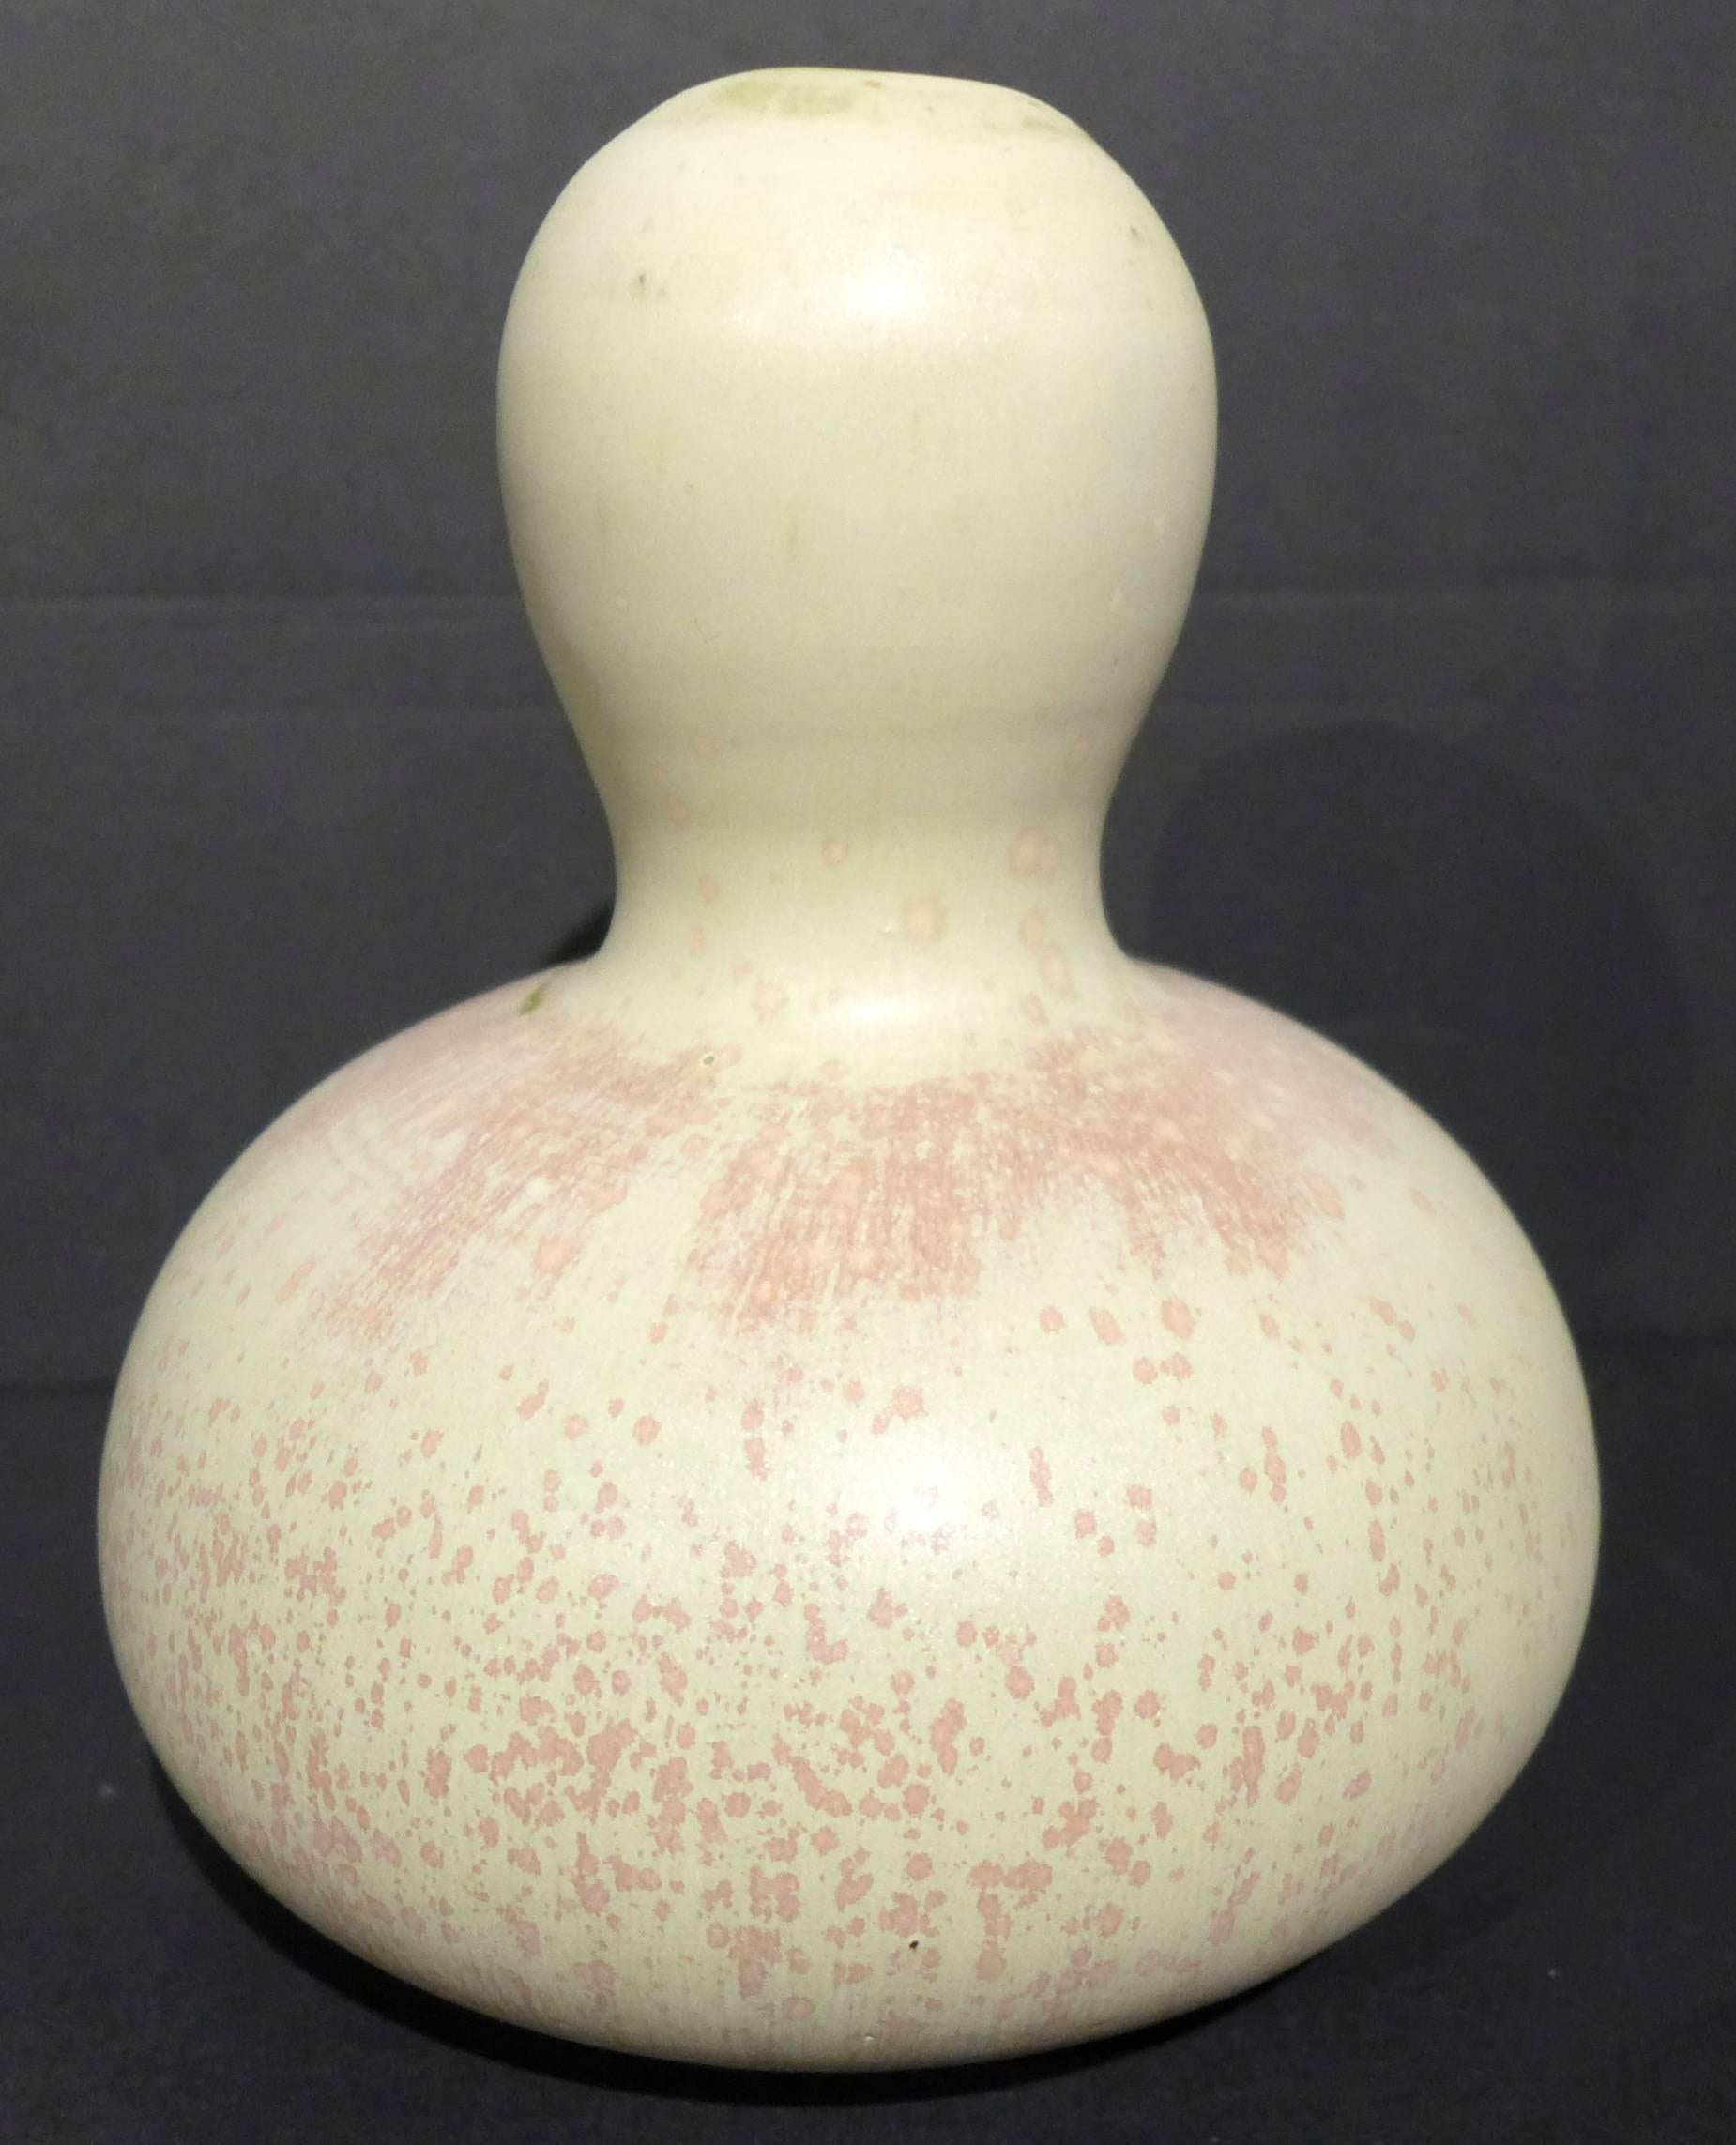 Gourd-shaped stoneware vessel with an unusual buff and brick pink glaze, by eminent Danish ceramic artist Axel Salto. Produced at Royal Copenhagen, circa 1950. In excellent original condition. Etched signature and painted waves on bottom.